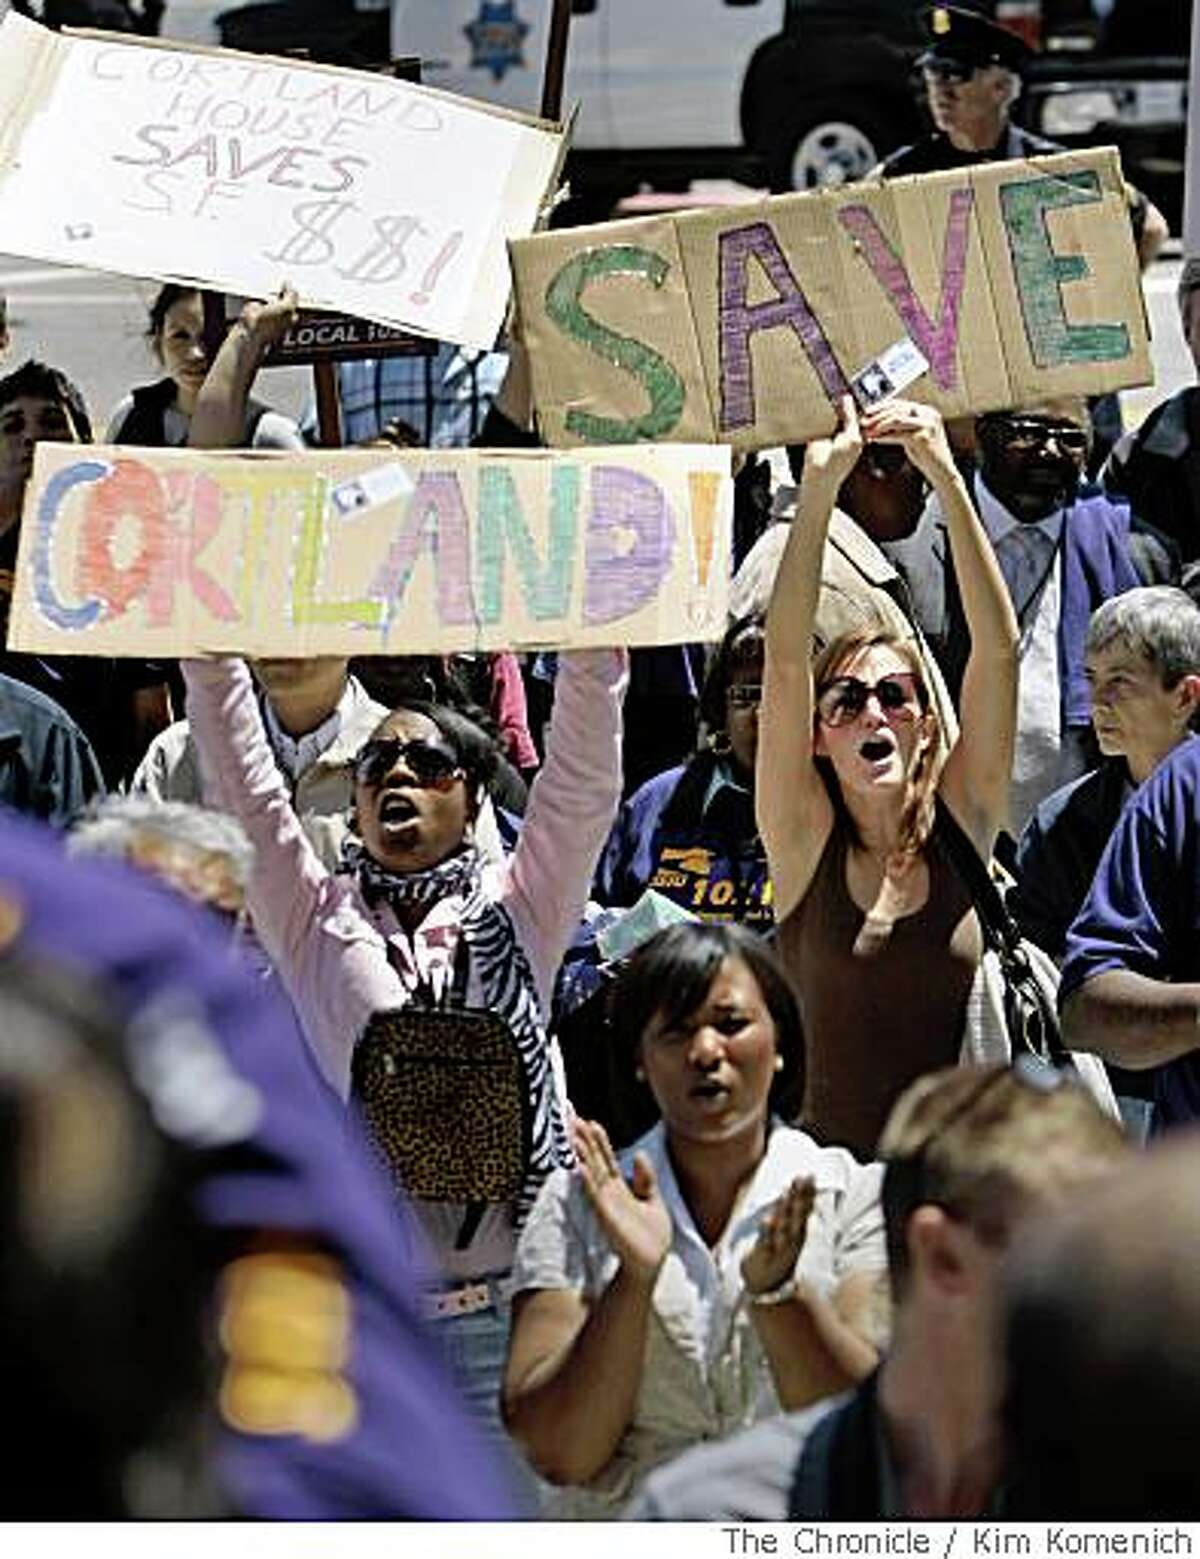 Antionette Jones, left and Shannon Tilston hold signs supporting Cortland House as members of Service Employees International Union Local 1021 hold a rally at San Francisco City Hall on Thursday, May 22, 2008.Photo by Kim Komenich / San Francisco Chronicle